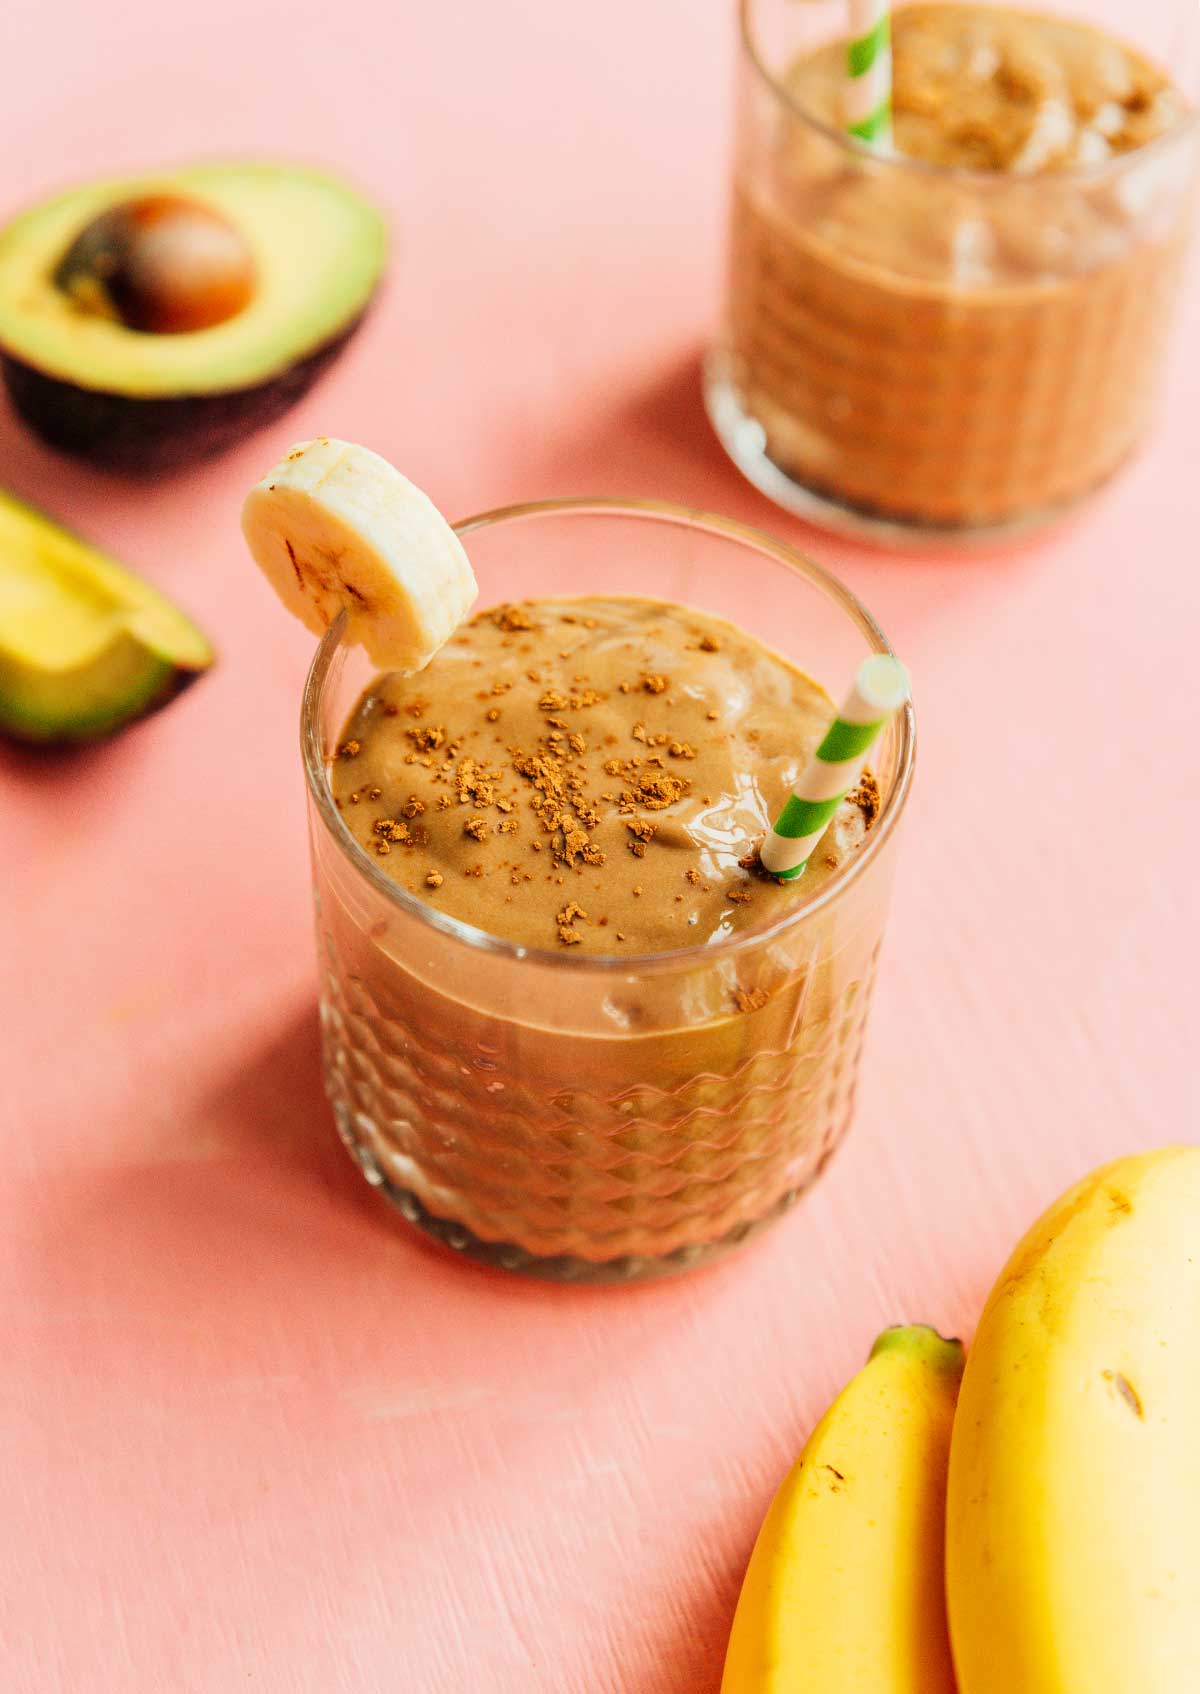 A glass filled with avocado chocolate smoothie and topped with cinnamon, a banana slice, and a green and white striped straw